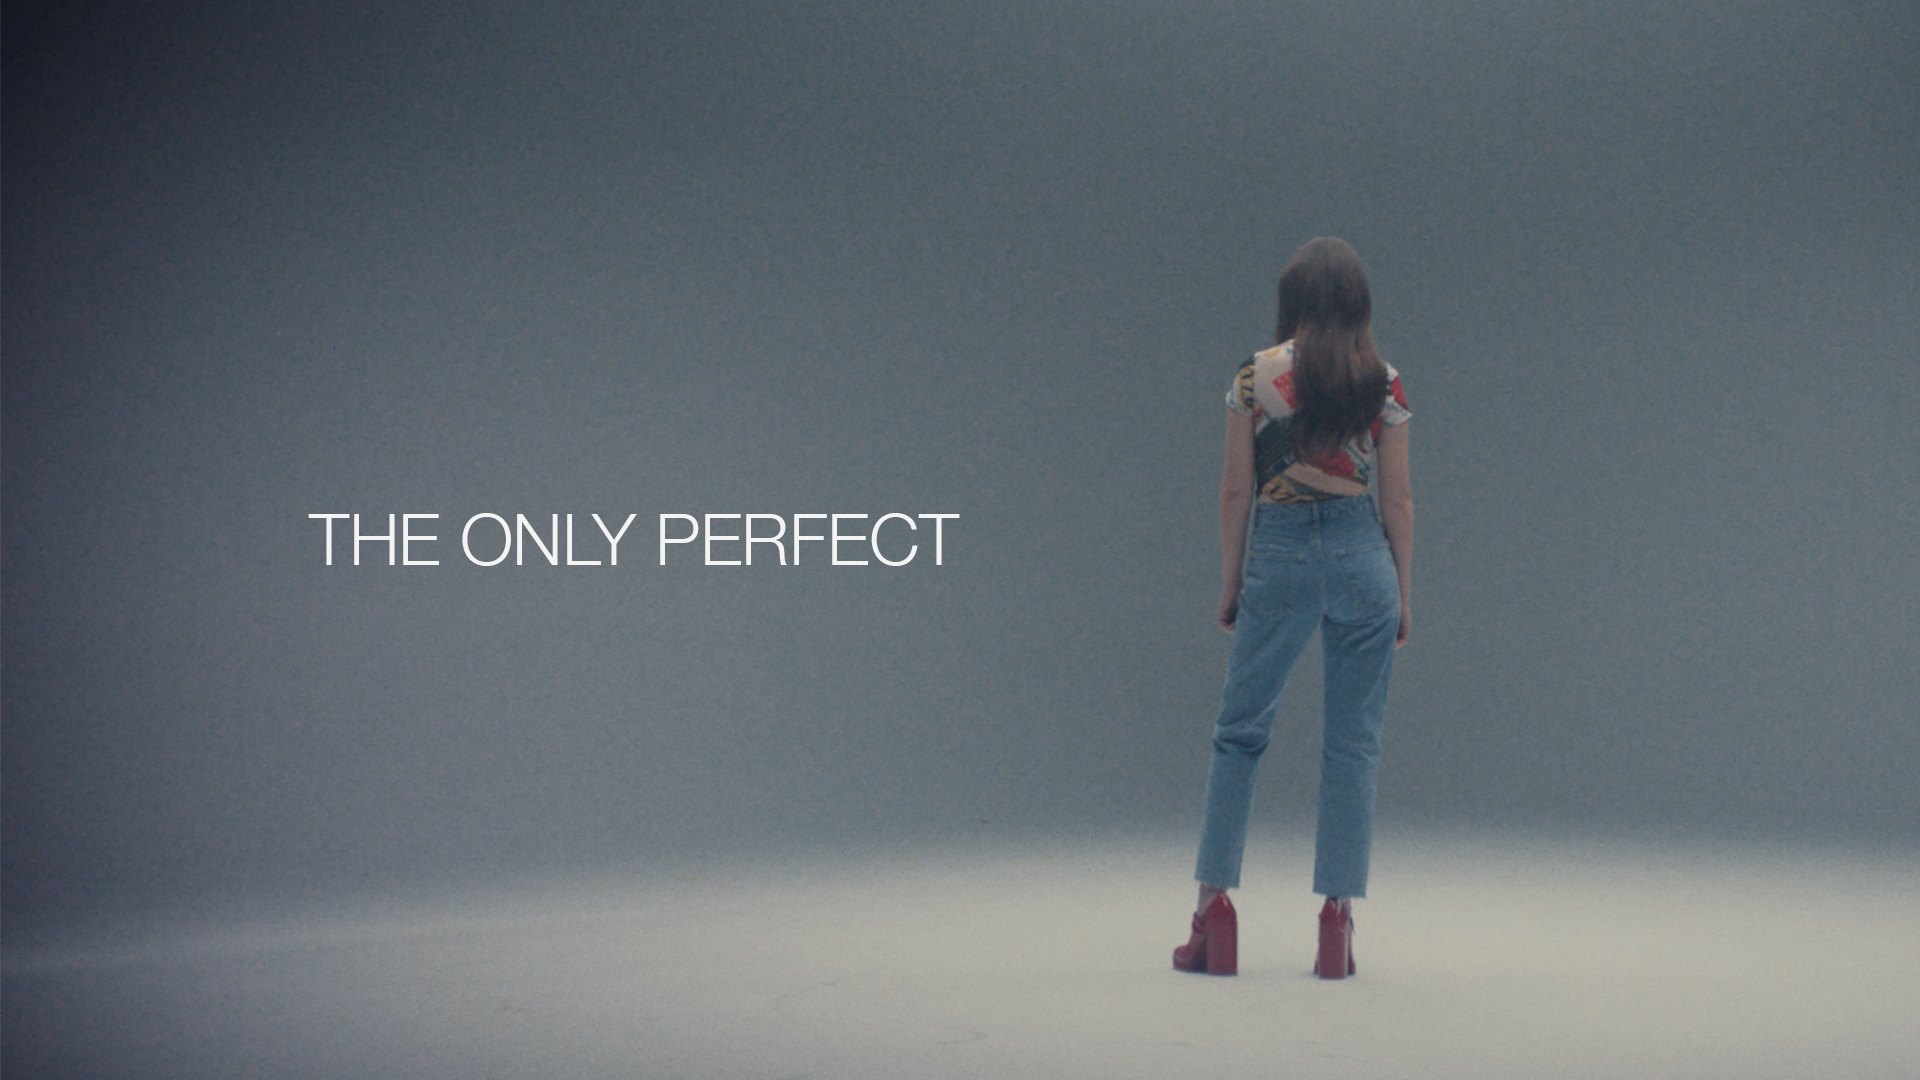 "The only perfect"